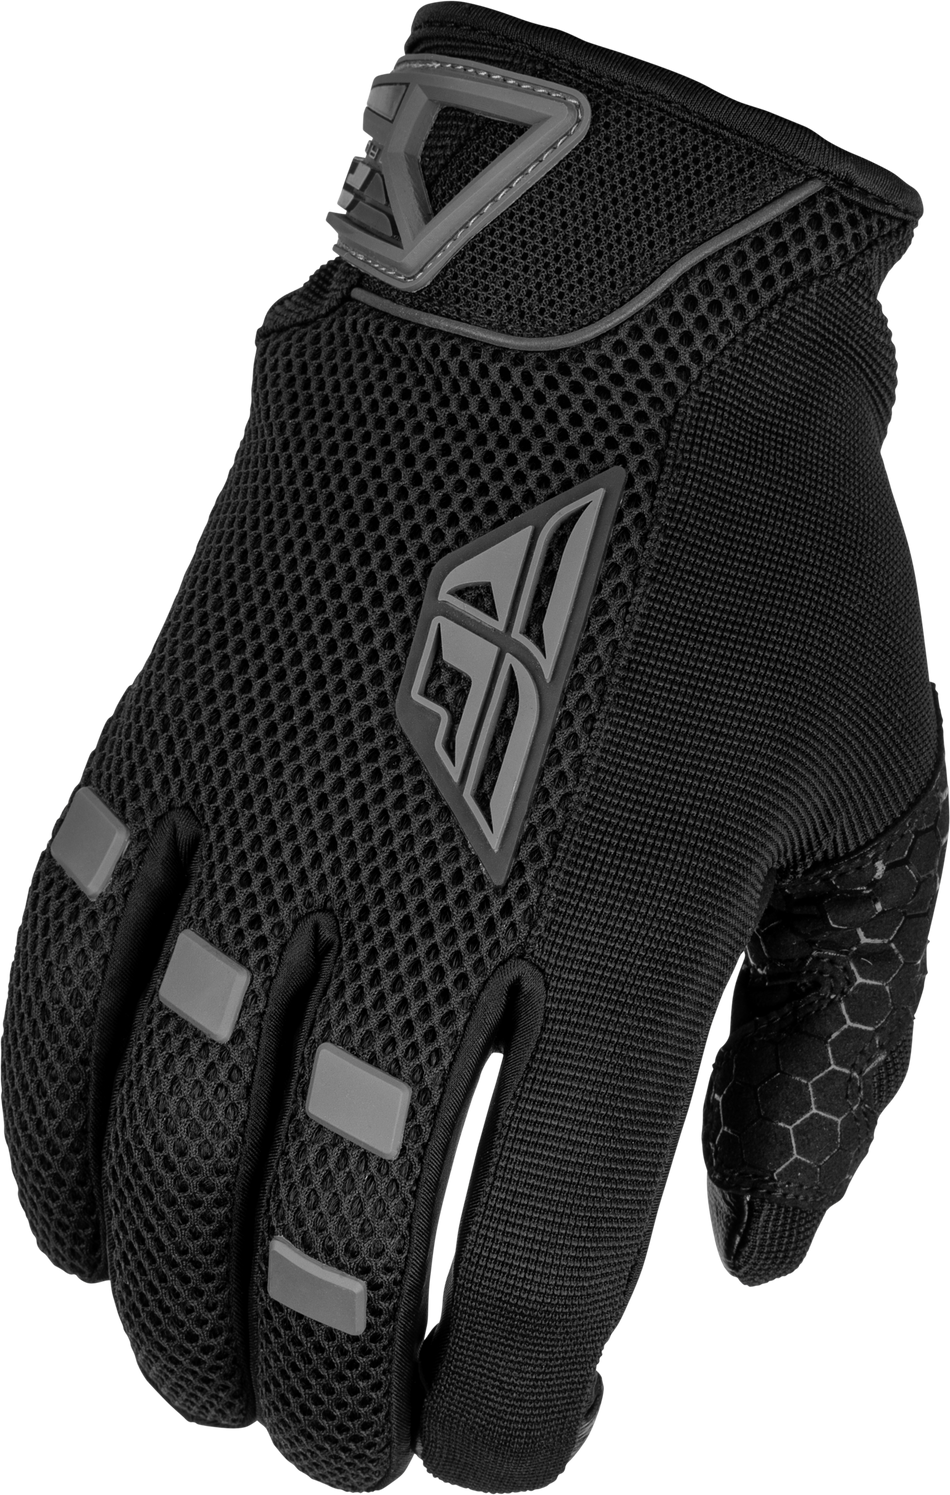 FLY RACING Women's Coolpro Gloves Black 2x 476-62142X